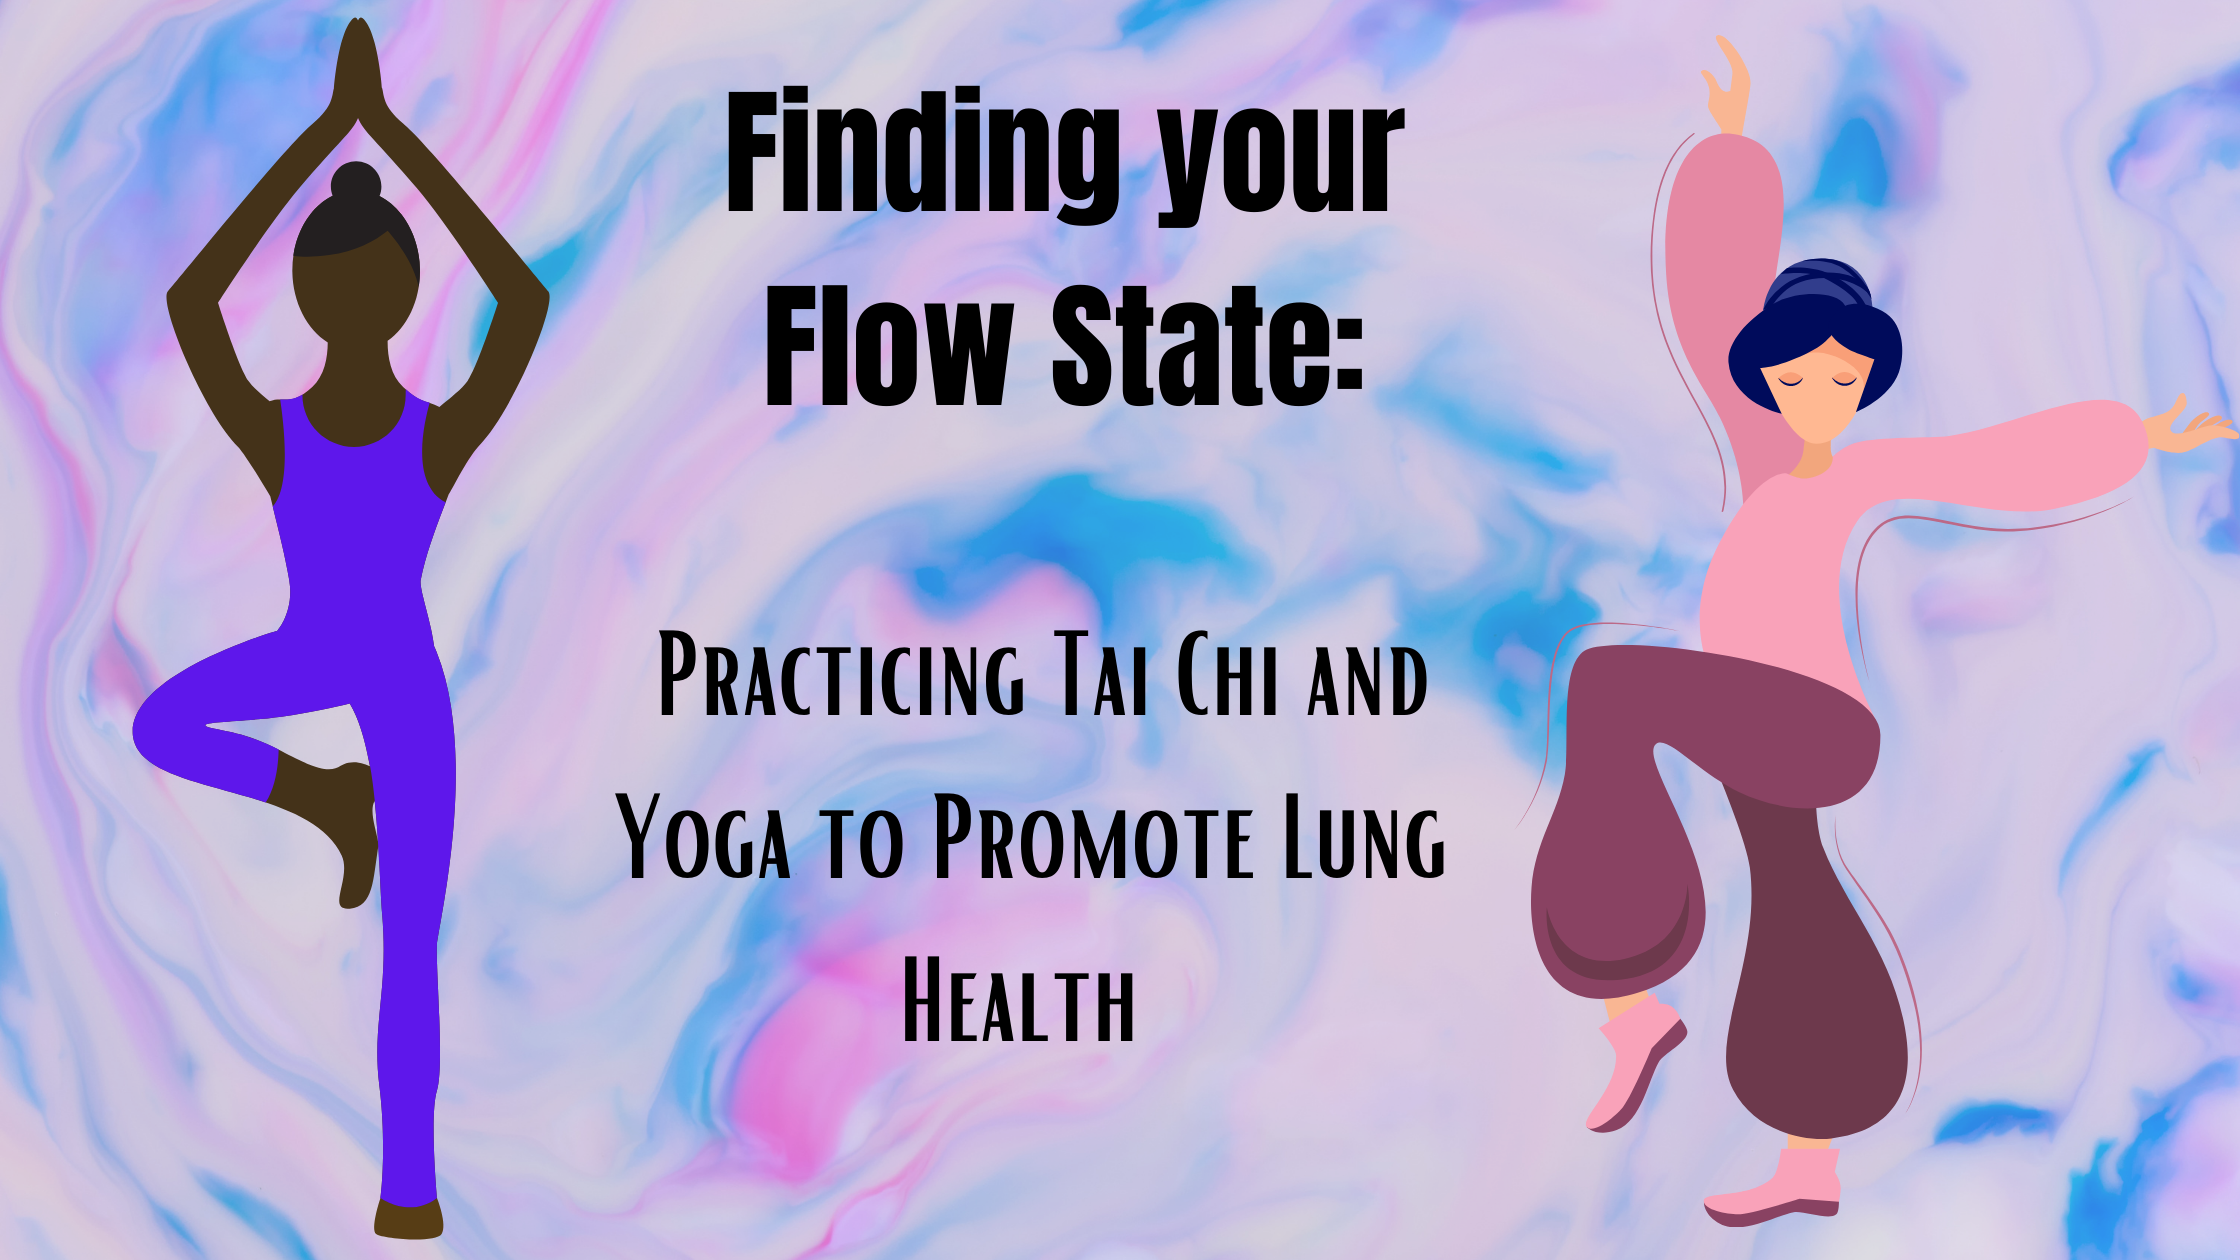 Practicing Tai Chi and Yoga to Promote Lung Health